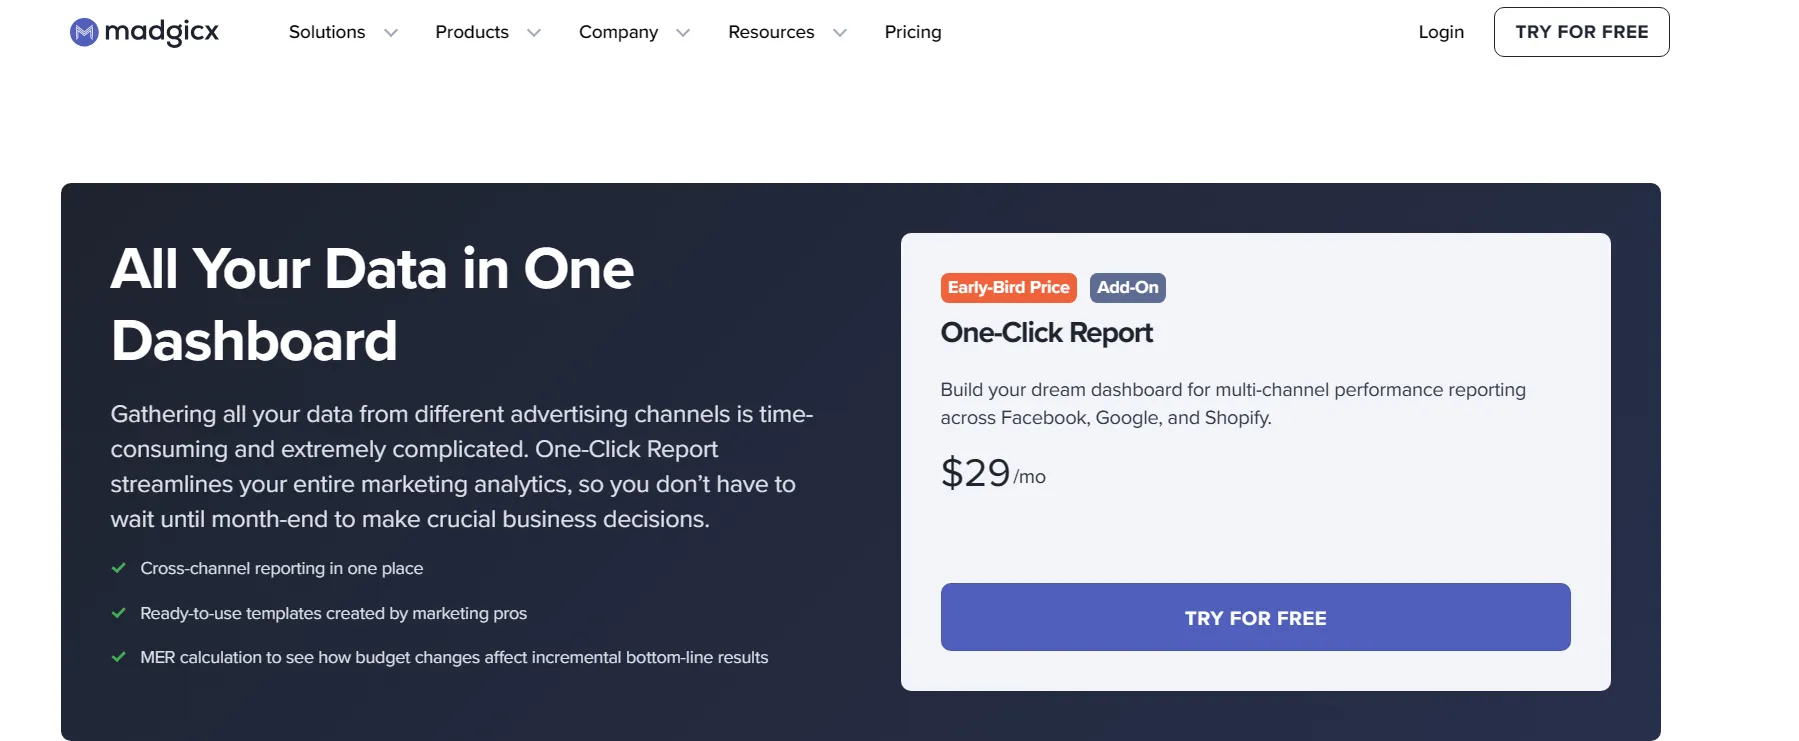 One-Click Report